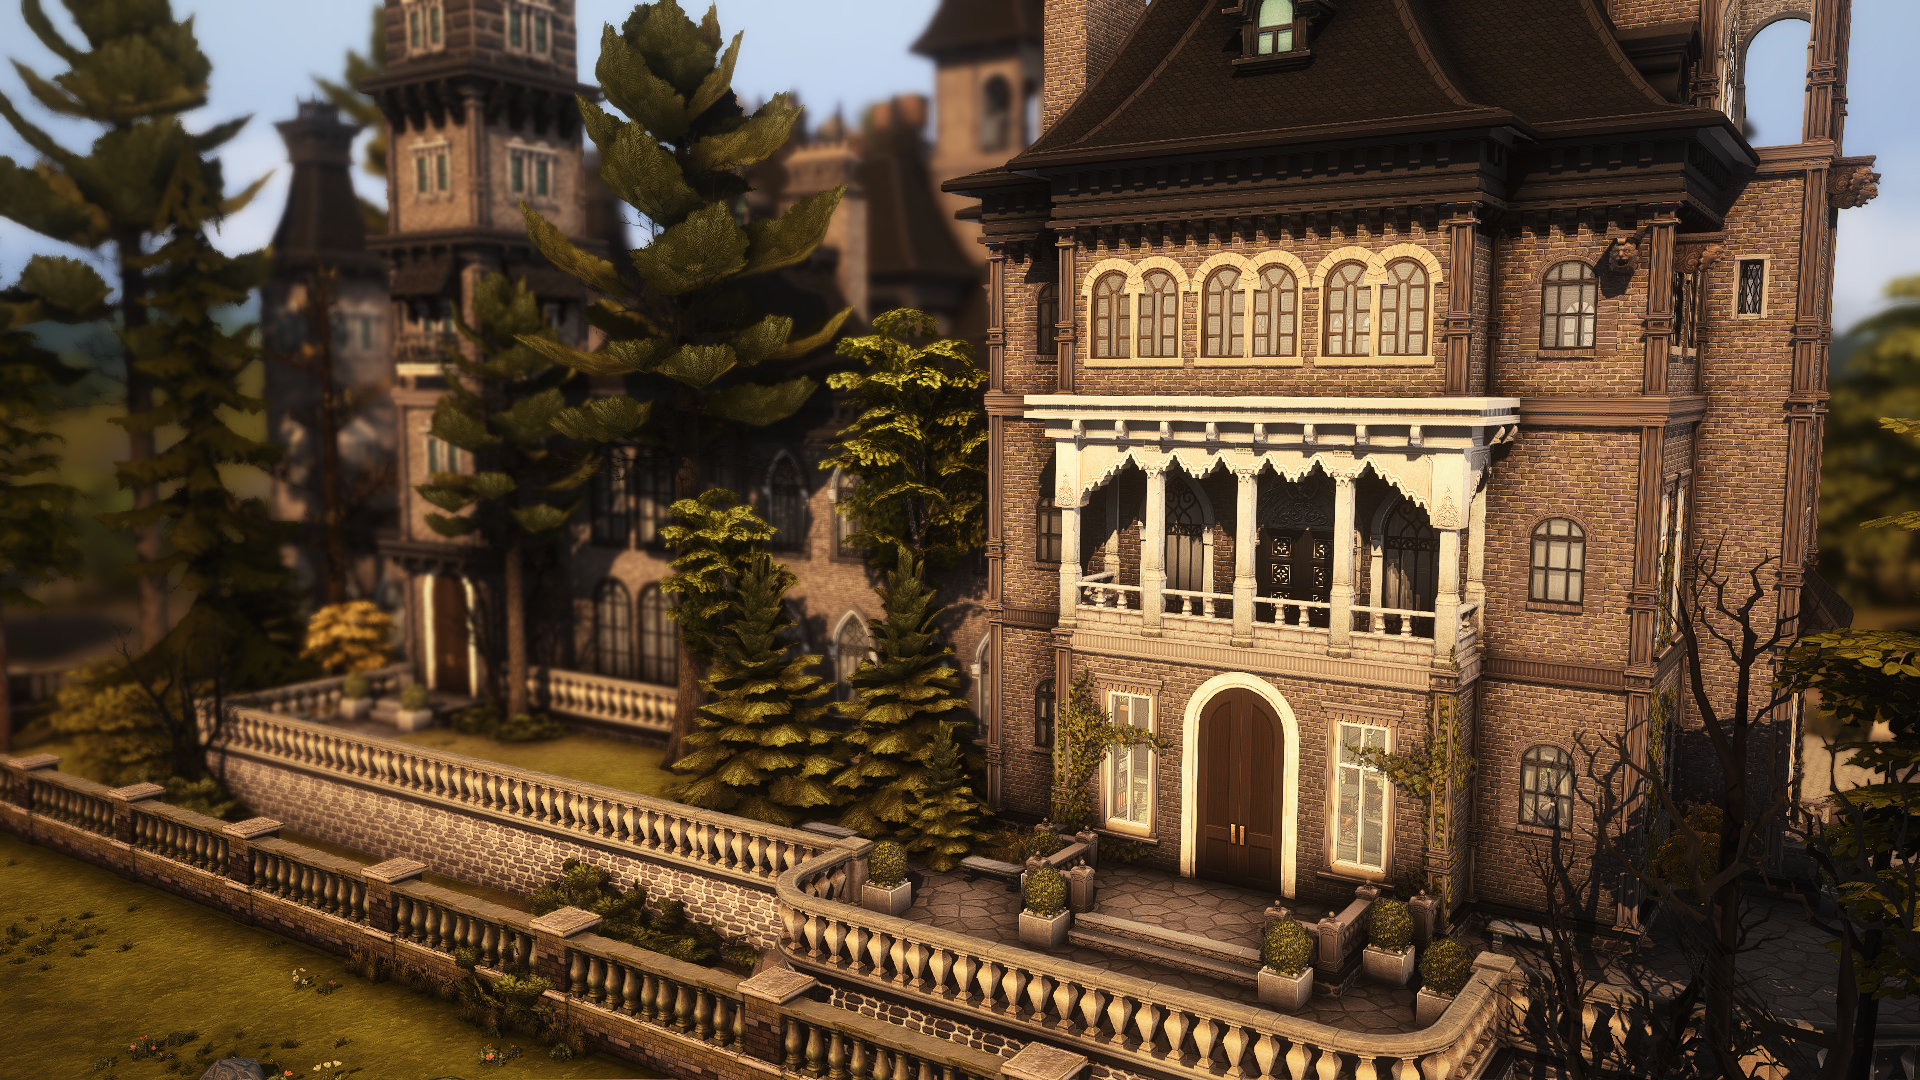 Nevermore Academy - The Sims 4 Rooms / Lots - CurseForge